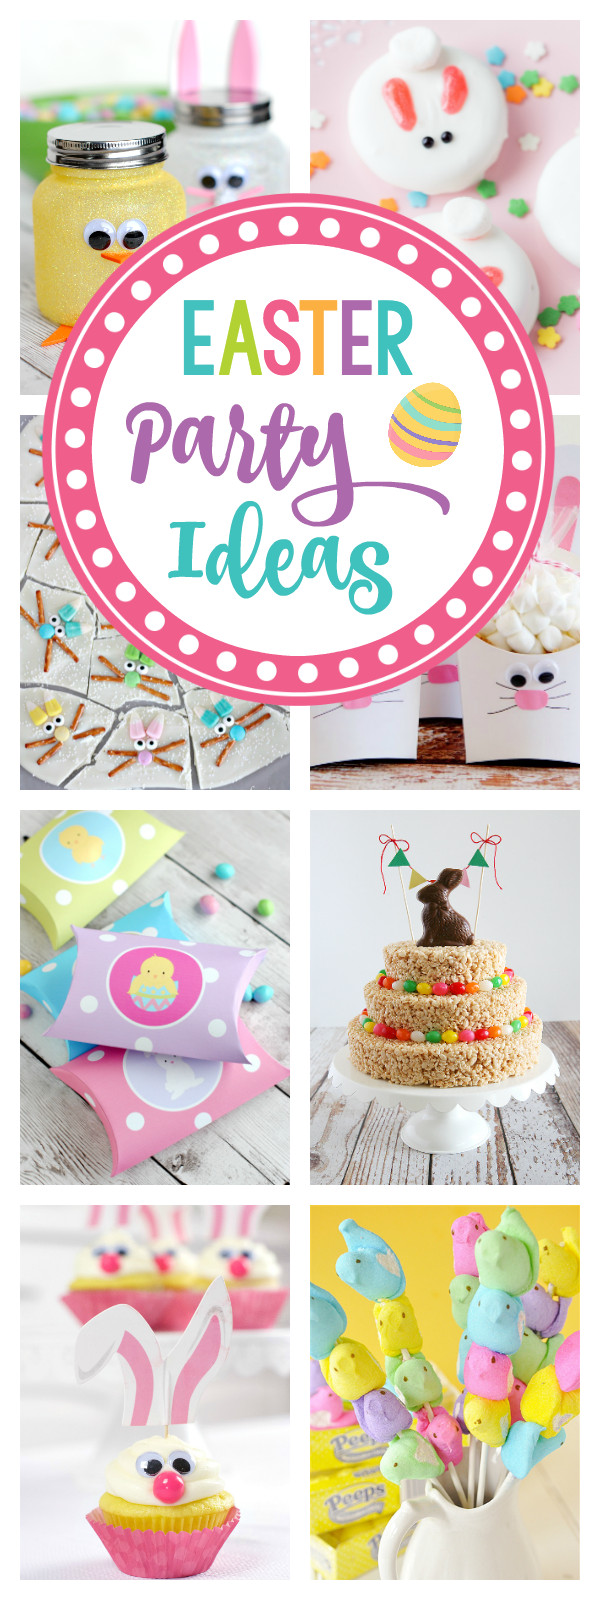 Party Ideas For Easter
 25 Fun Easter Party Ideas for Kids – Fun Squared